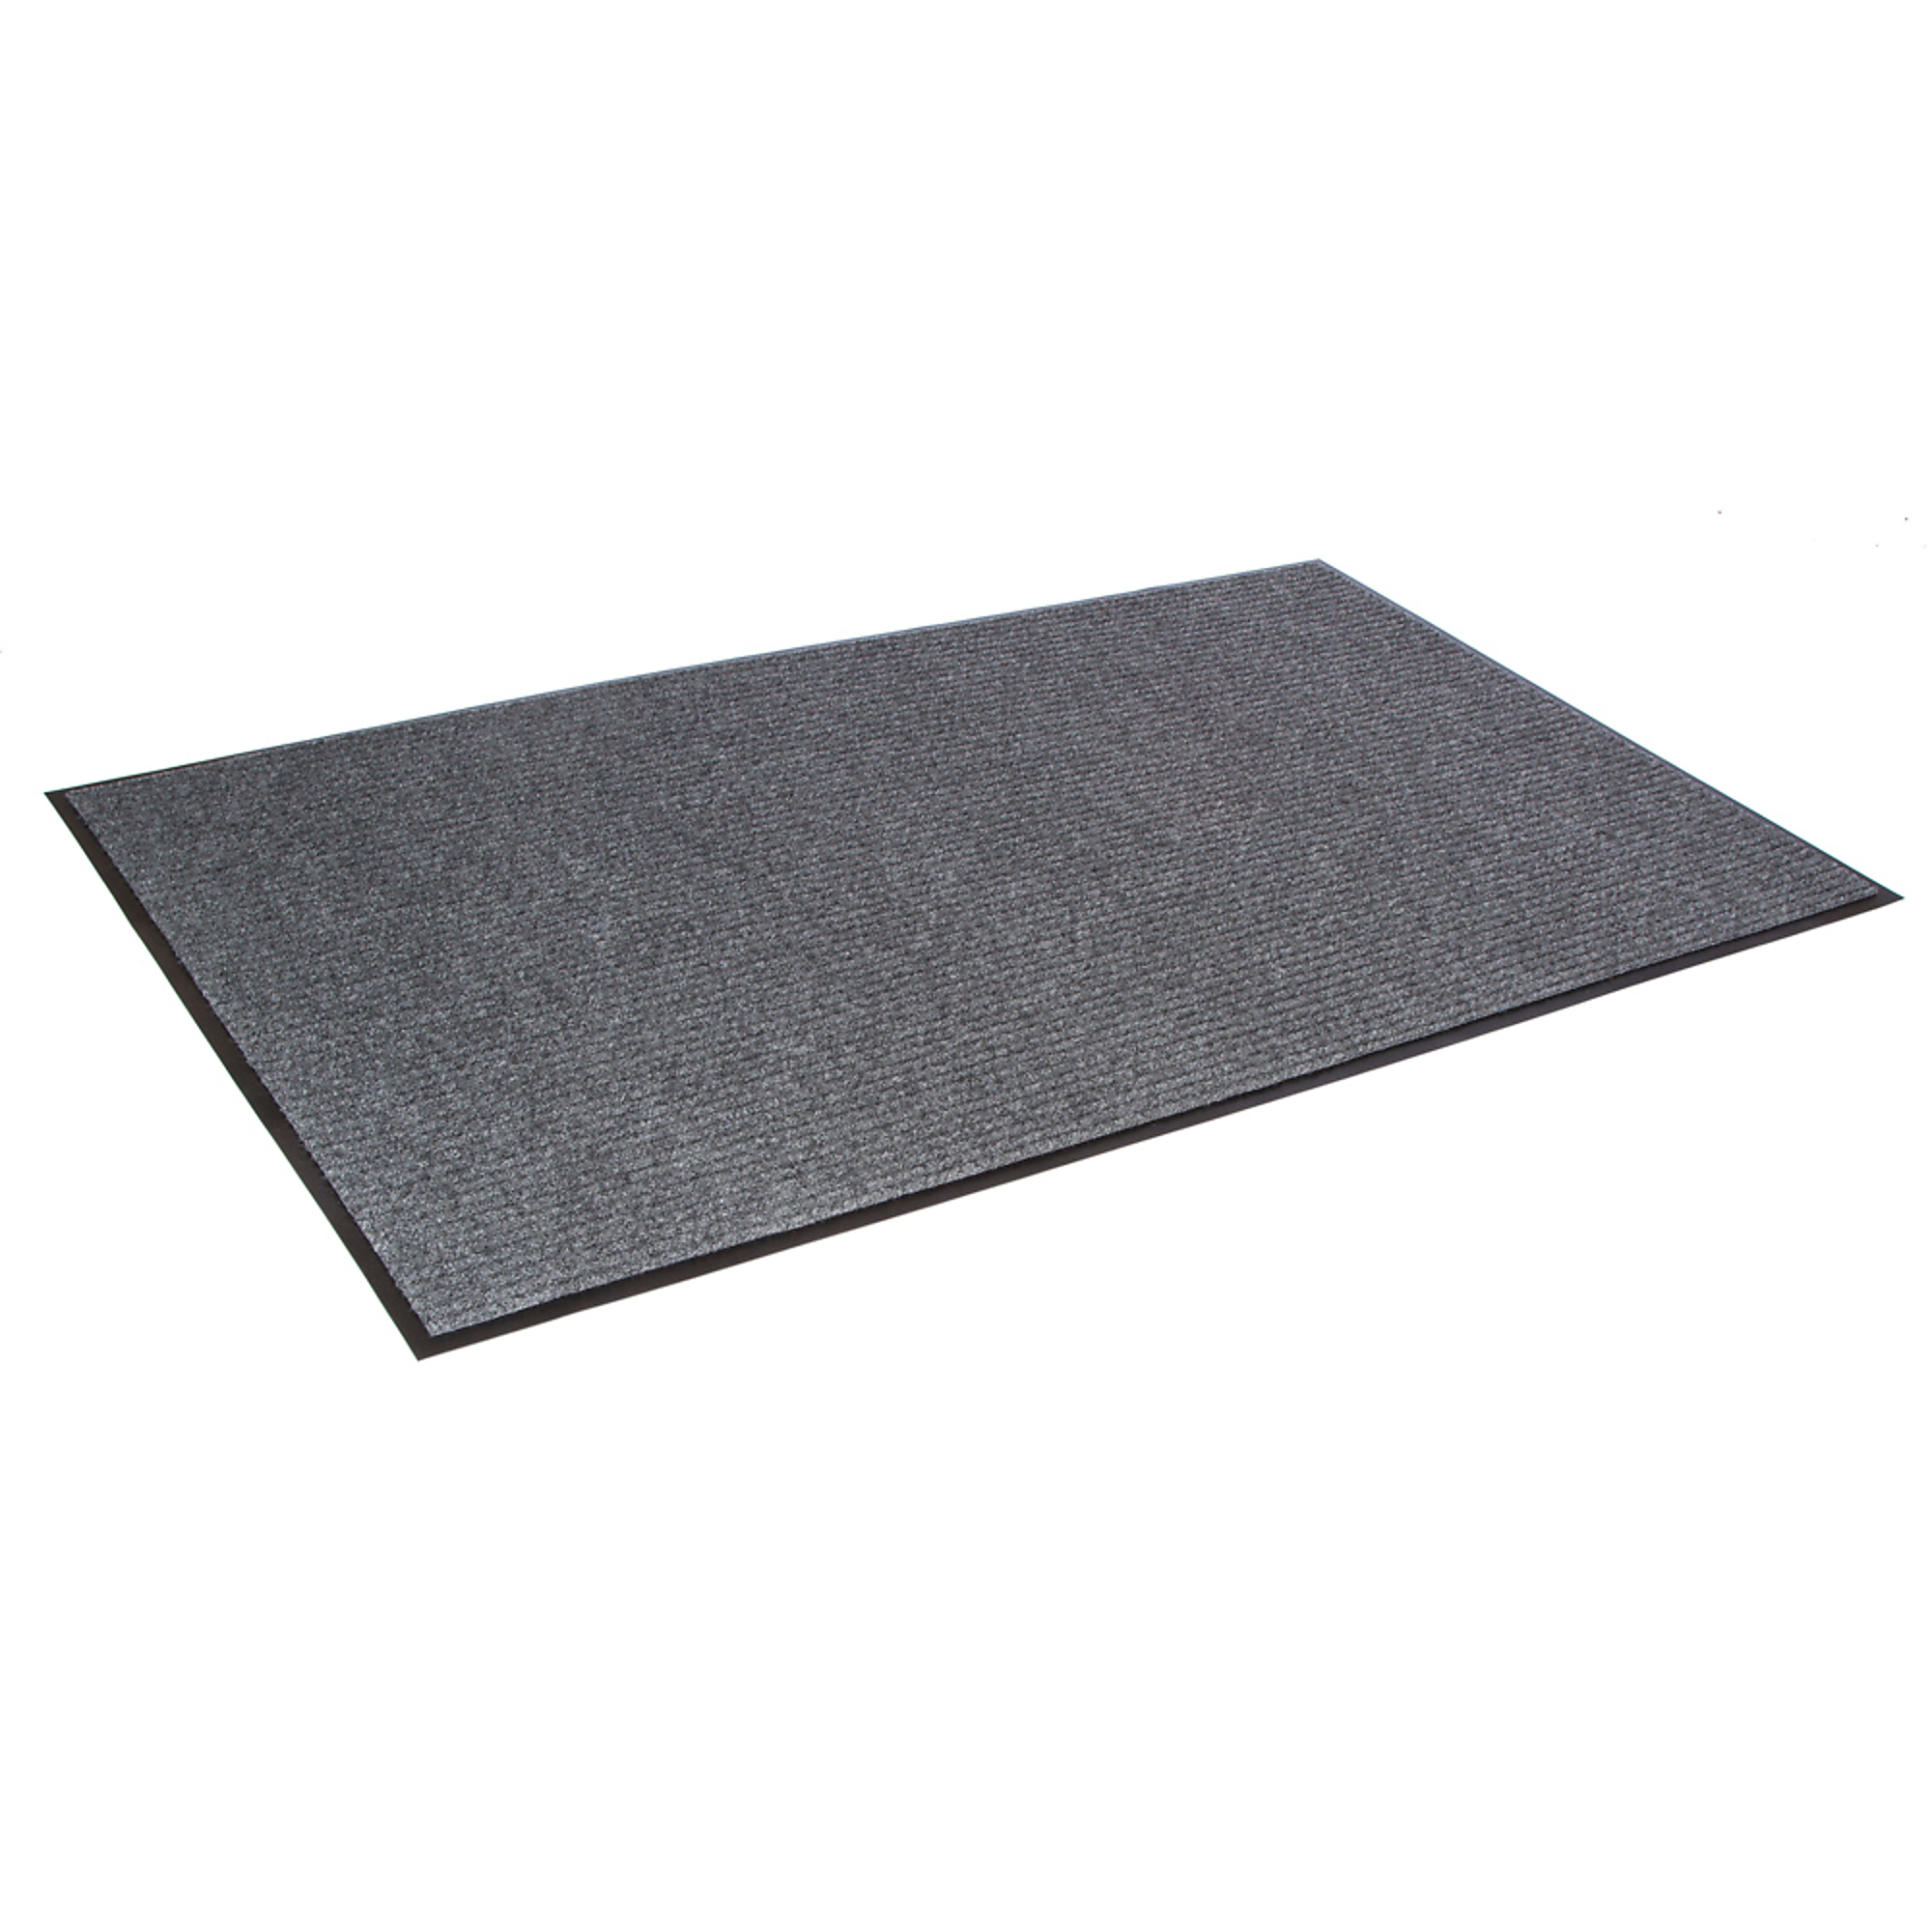 Crown Matting Technologies, Needle-Rib 4ft.x6ft. Gray, Width 48 in, Length 72 in, Thickness 5/16 in, Model NR 0046GY